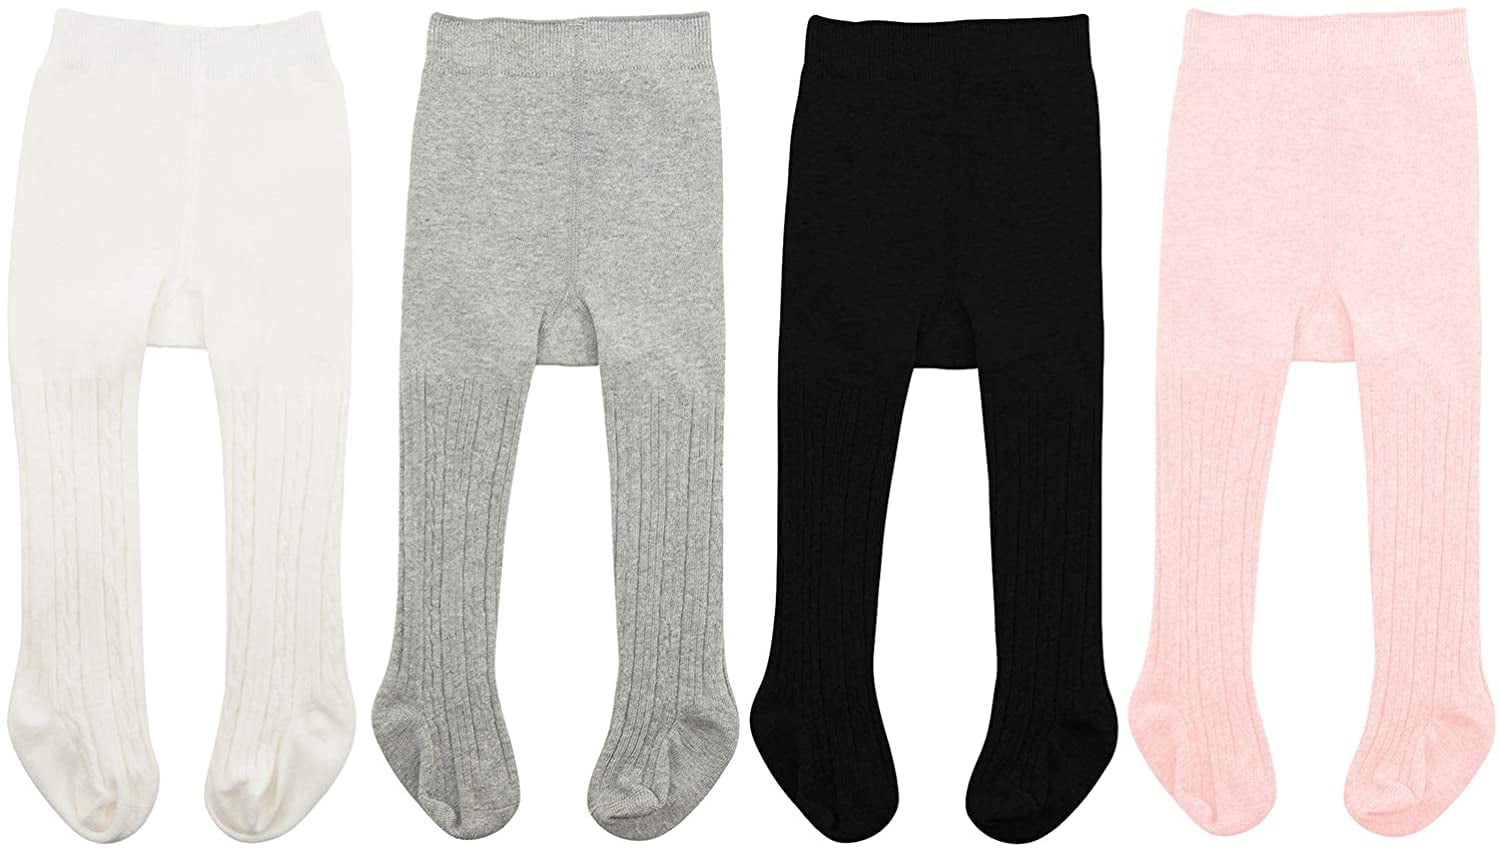 Zando Baby Girl Tights Thick Cable Knit Leggings Stockings Cotton ...